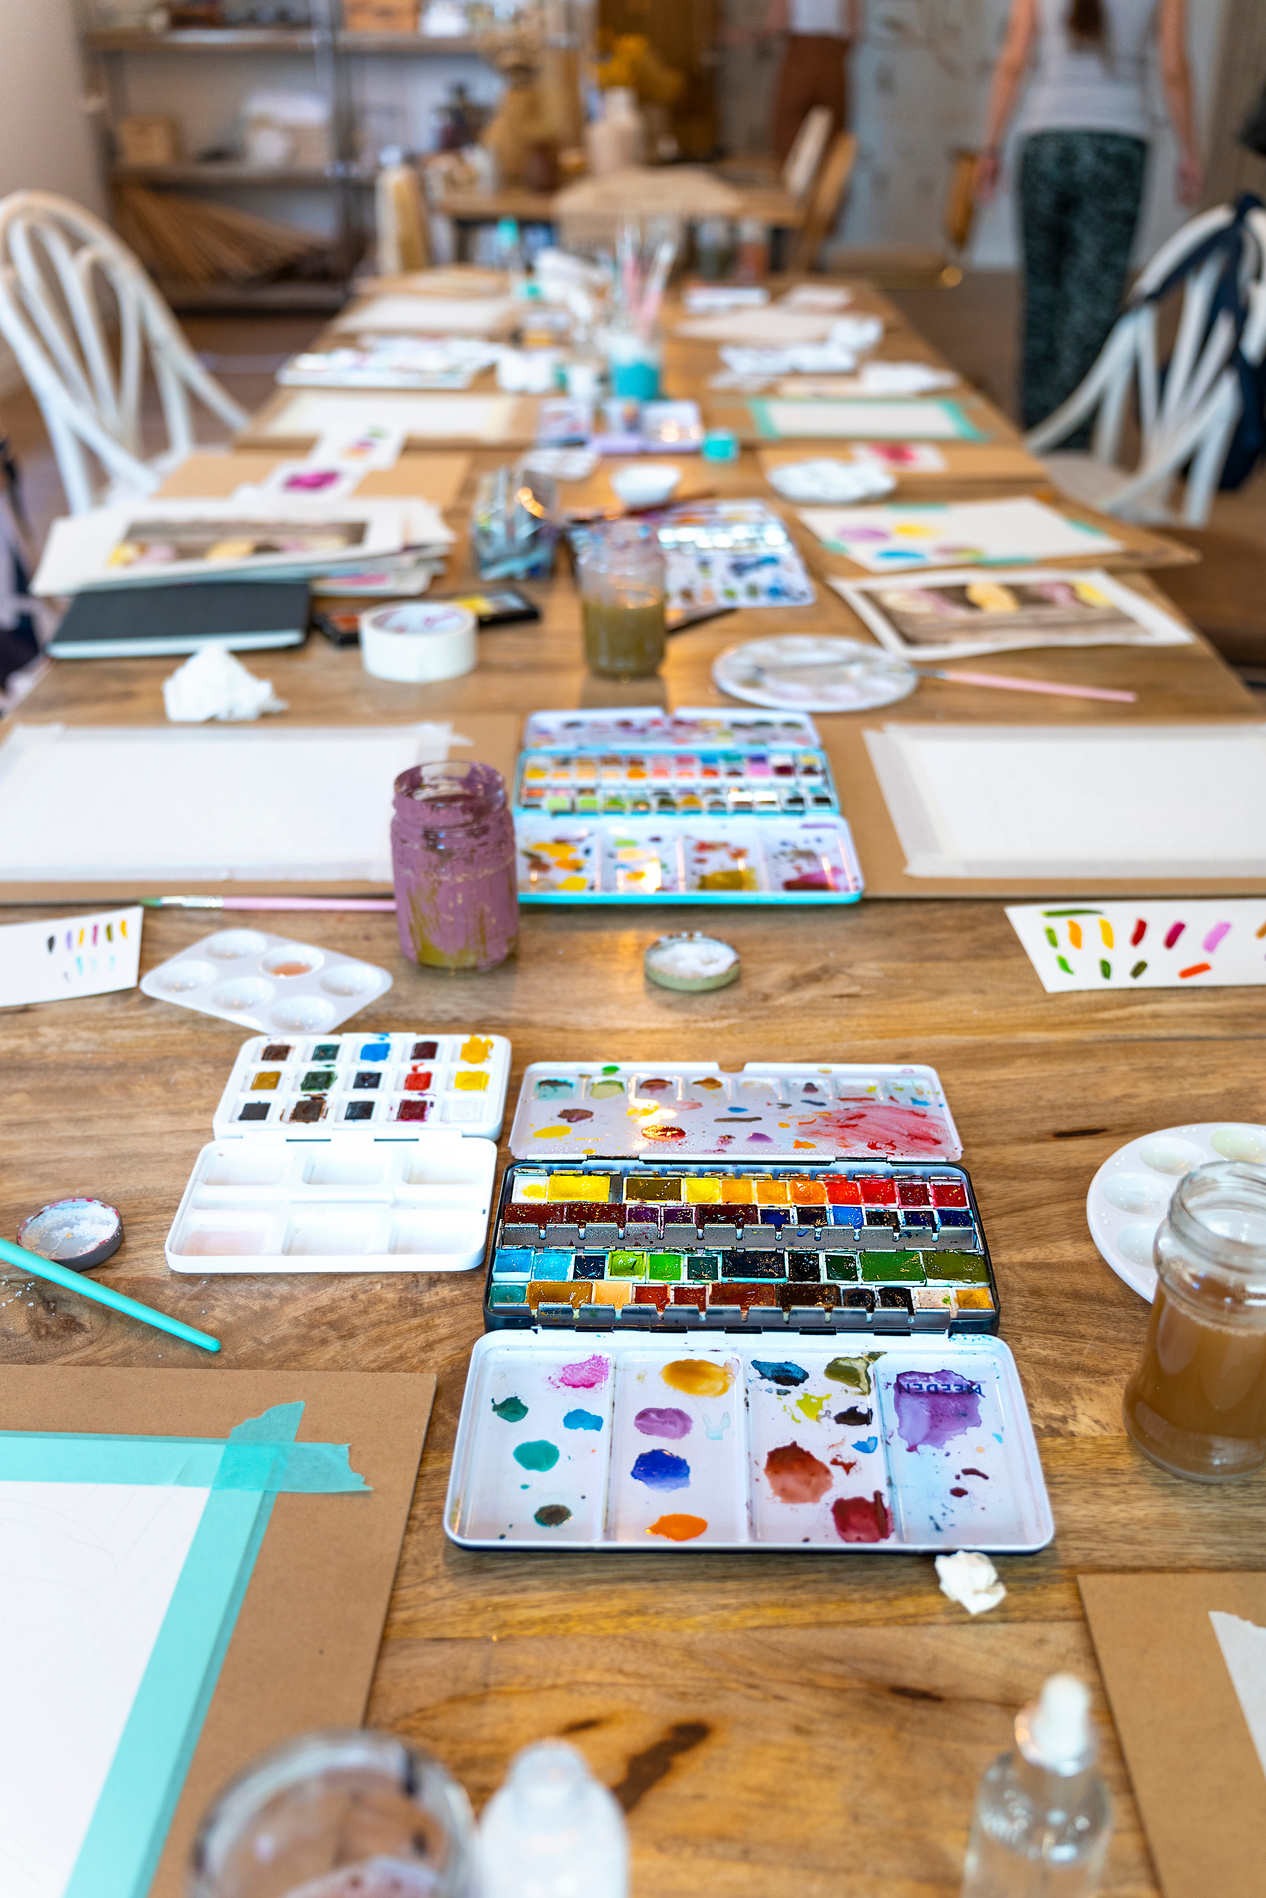 Watercolor Workshop. Creative Acuarela Workshop: Students Channel their Inner Artists